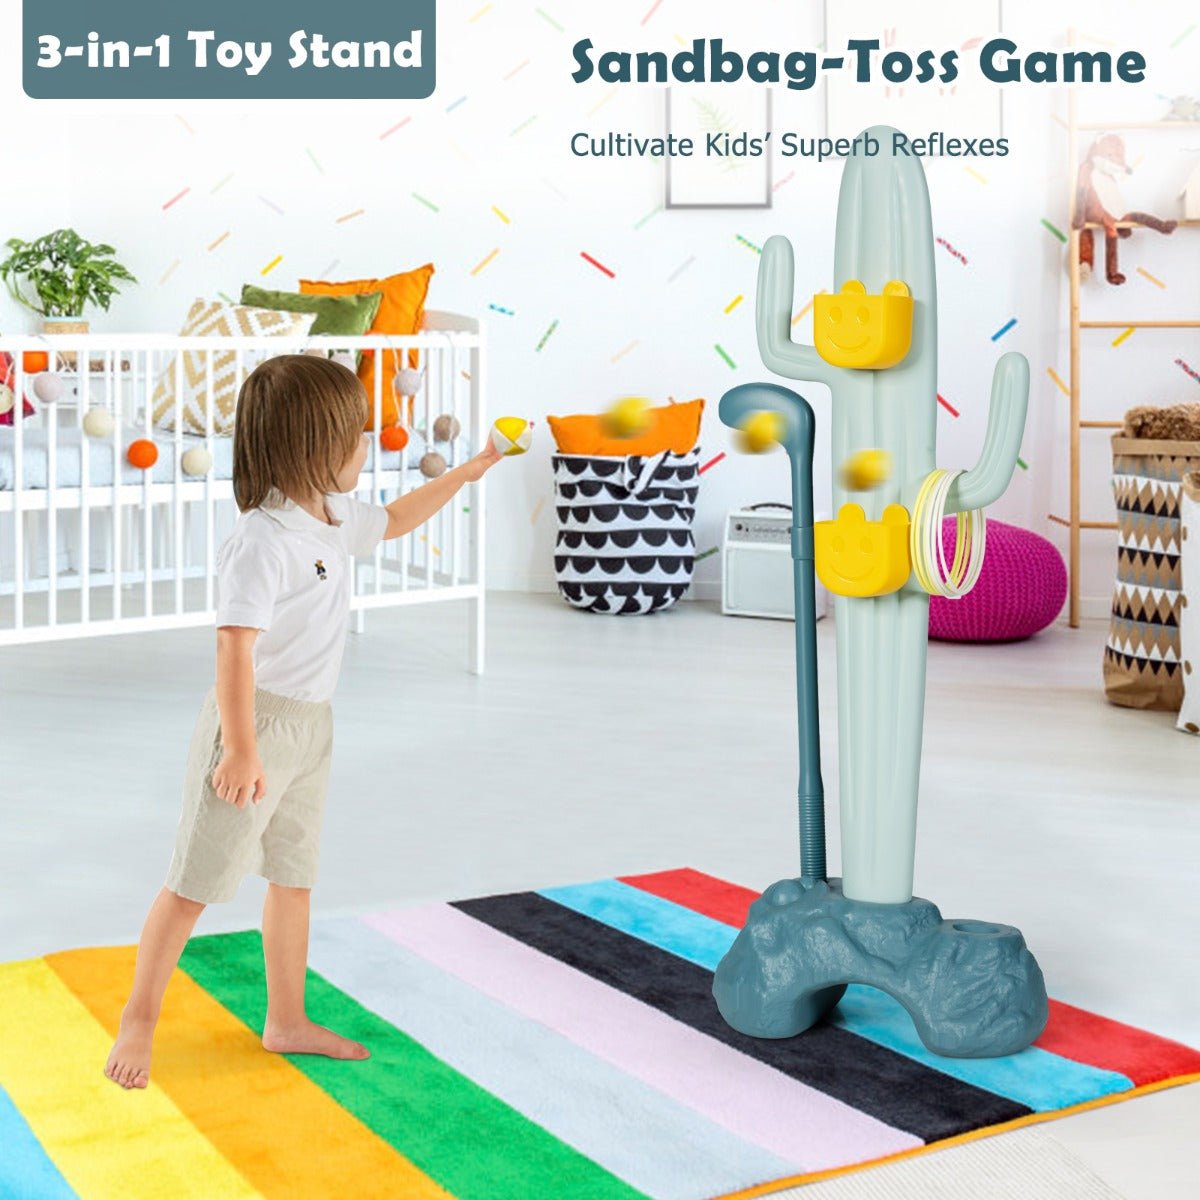 Cactus Toy Stand Rack with Sandbag-Toss for Kids 3+ Years Old